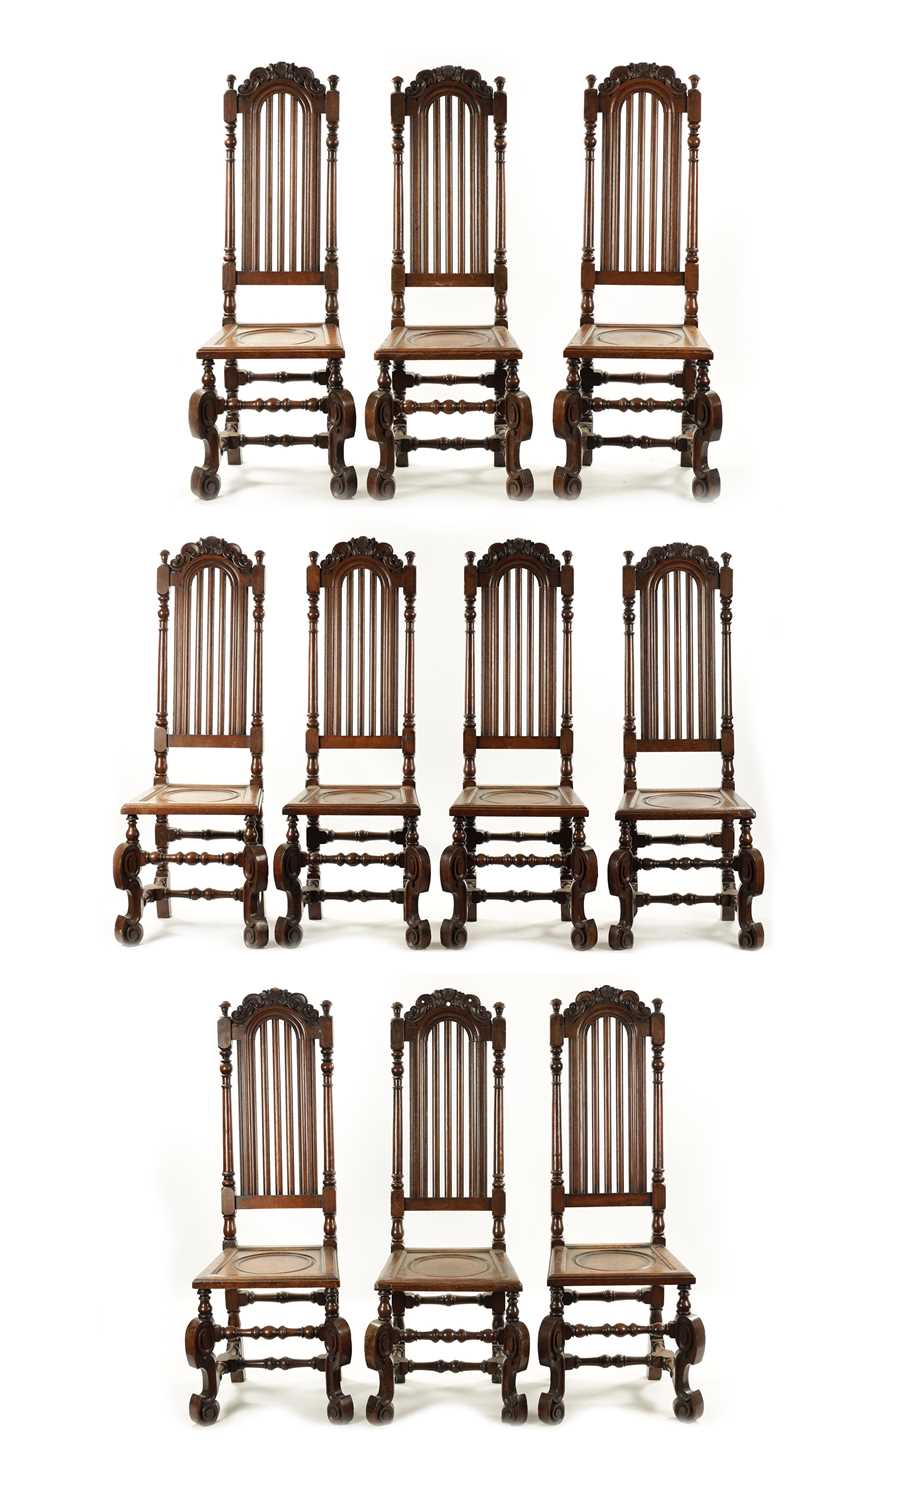 A RARE SET OF TEN EARLY 18TH CENTURY WILLIAM AND MARY STYLE OAK CHAIRS